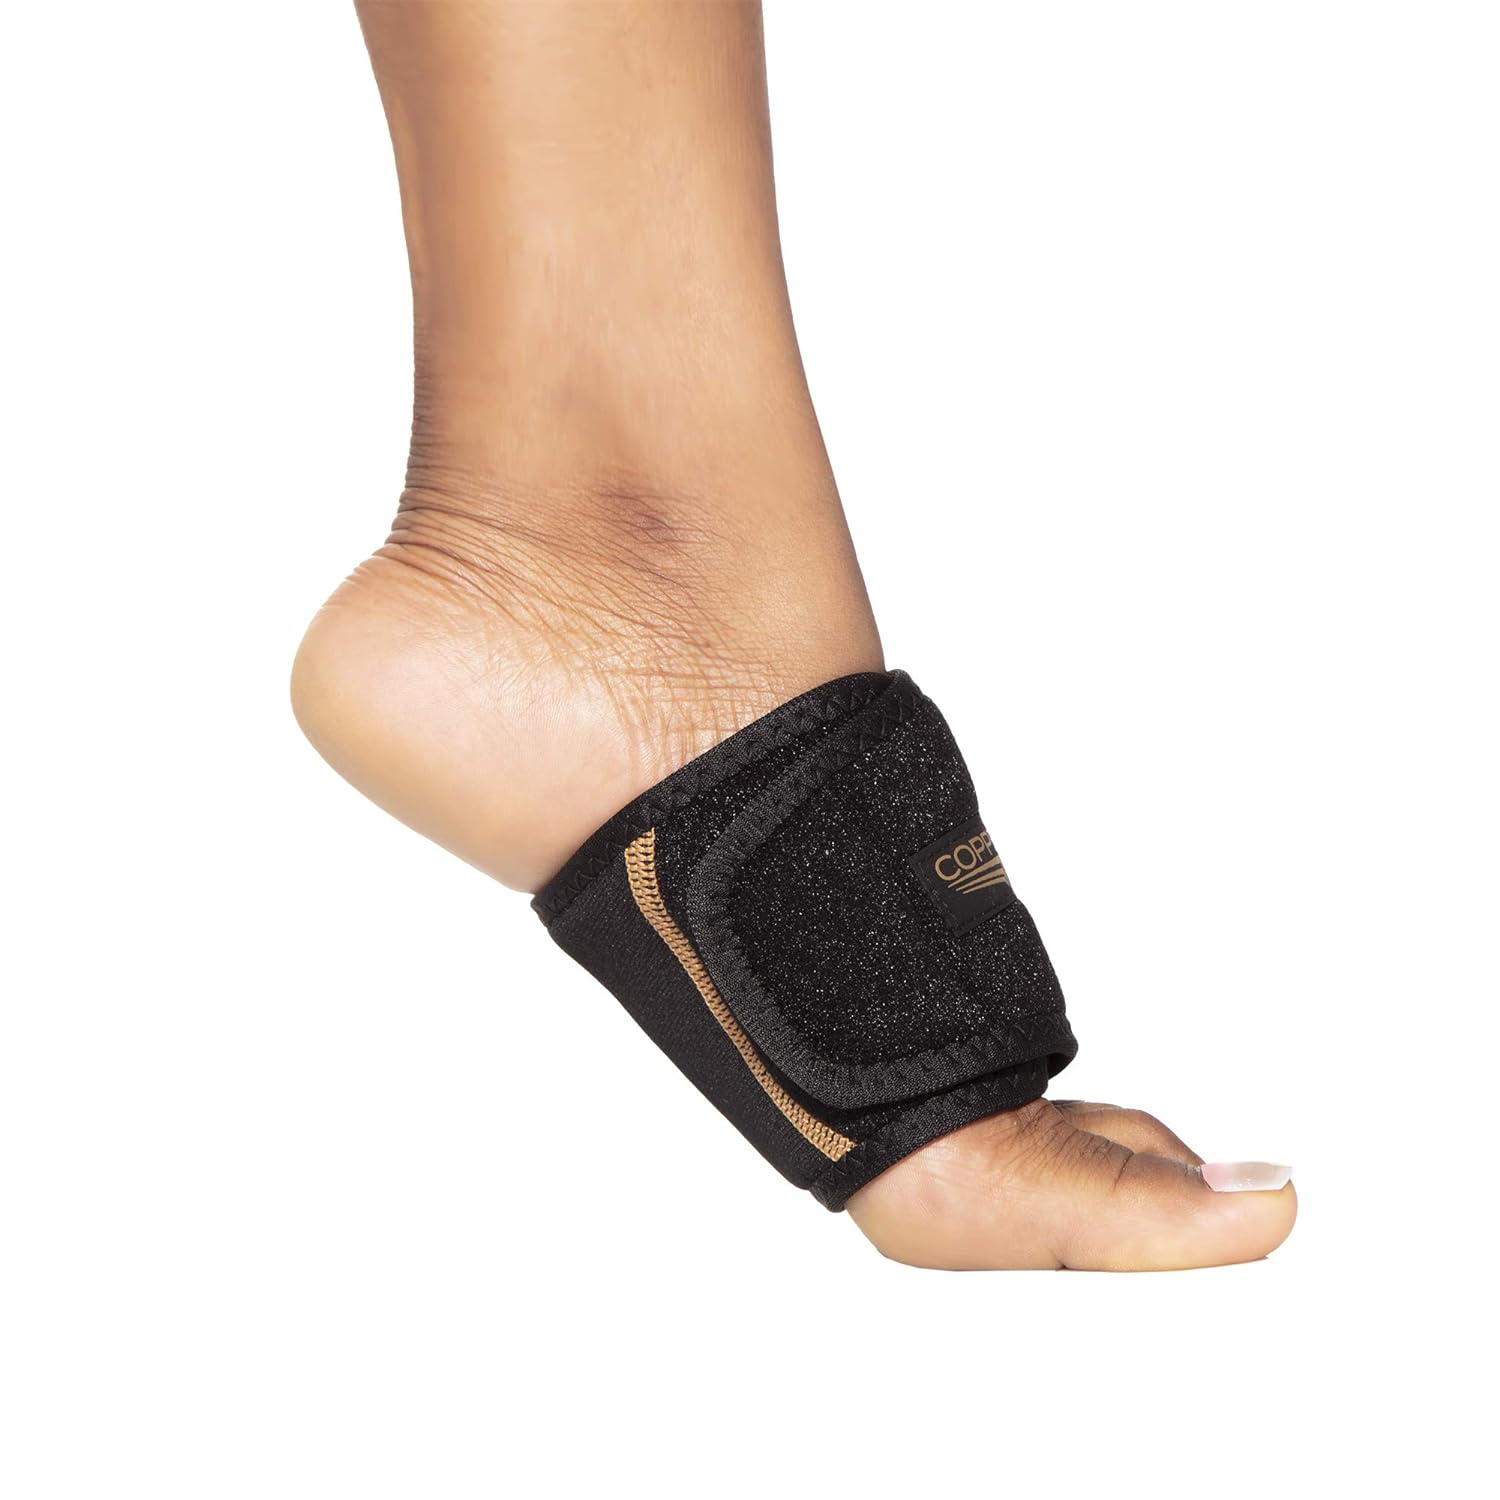 Copper Fit Rapid Relief Arch Foot Wrap w/ Hot or Cold Gel Pack $2.70 + Free Shipping w/ Prime or on $35+